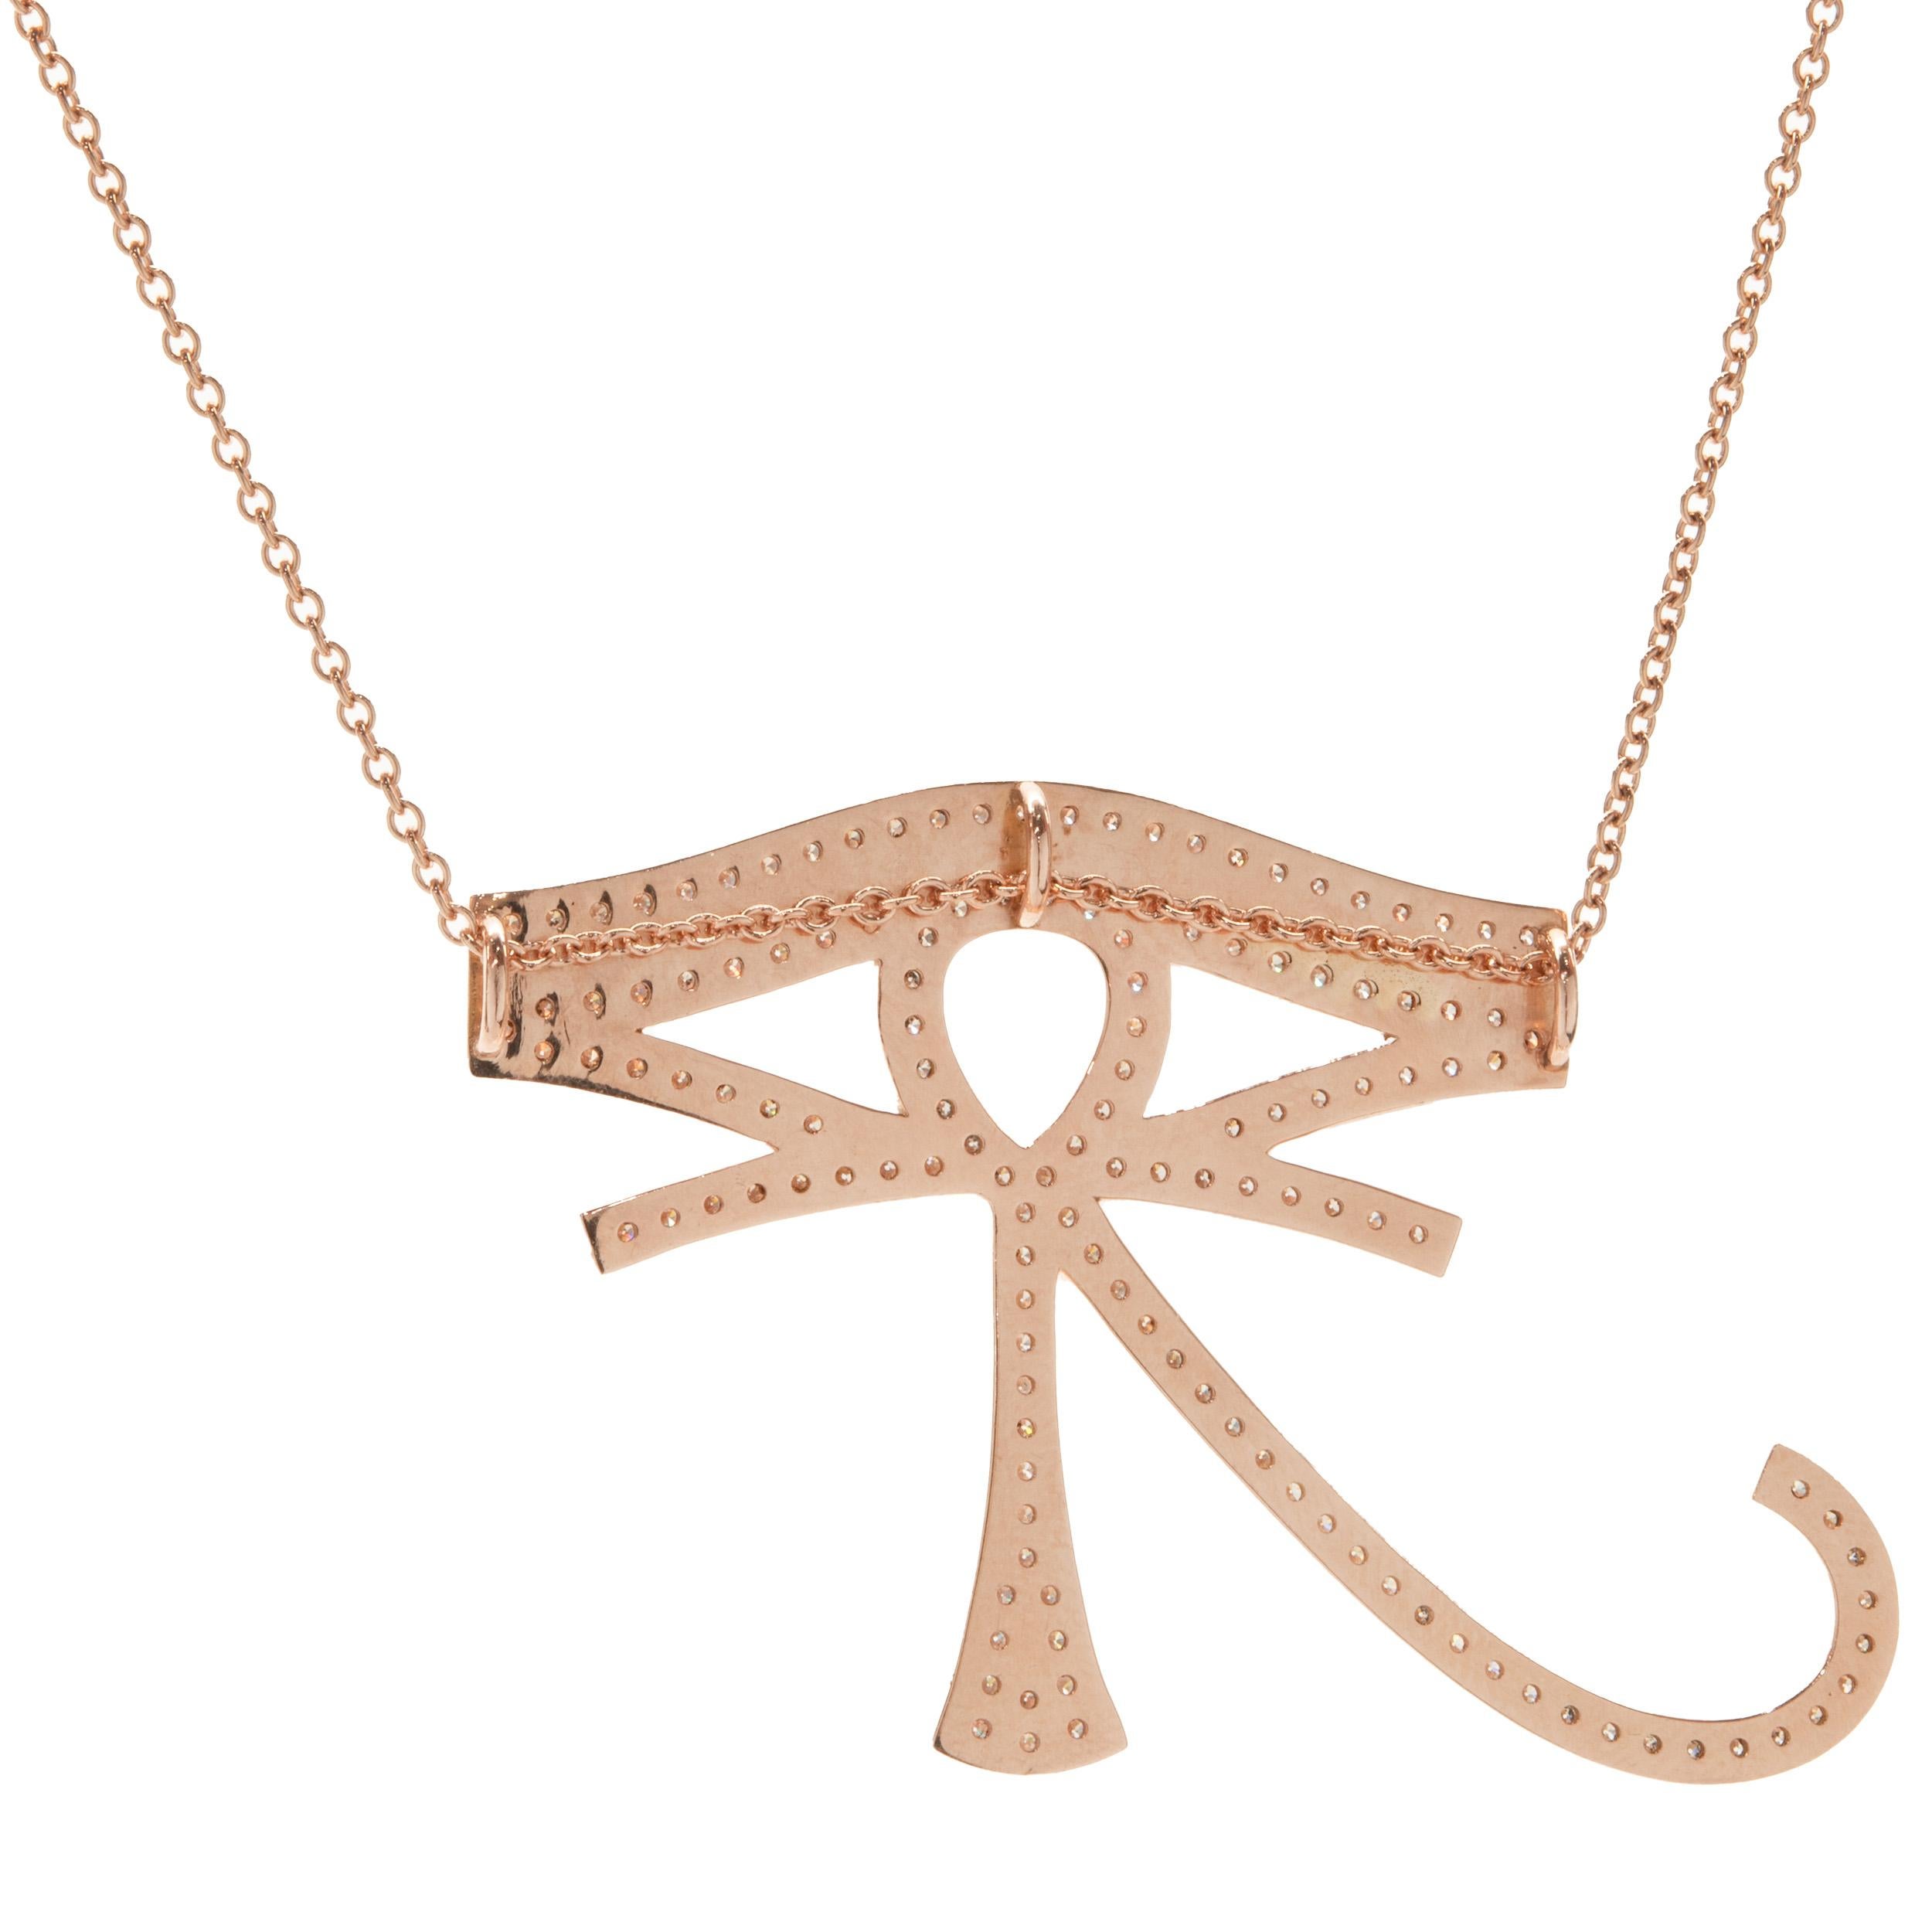 Designer: custom design
Material: 14K rose gold
Diamond: 139 round brilliant cut = 2.07cttw
Color: Champagne
Clarity: SI1
Dimensions: necklace measures 18-inches in length 
Weight: 12.92 grams
 